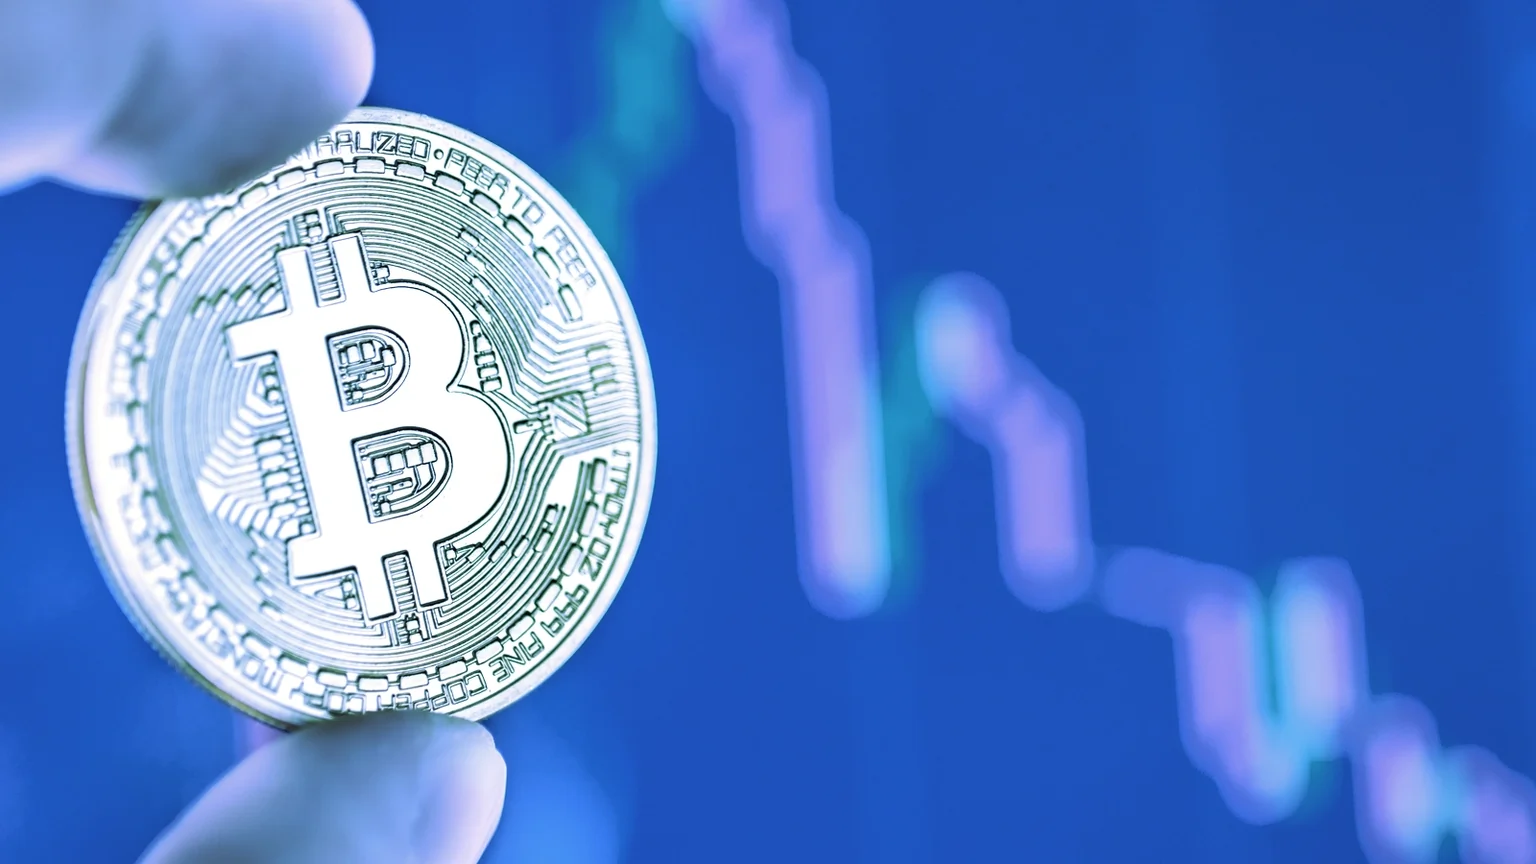 A big day for Bitcoin. Image: Shutterstock